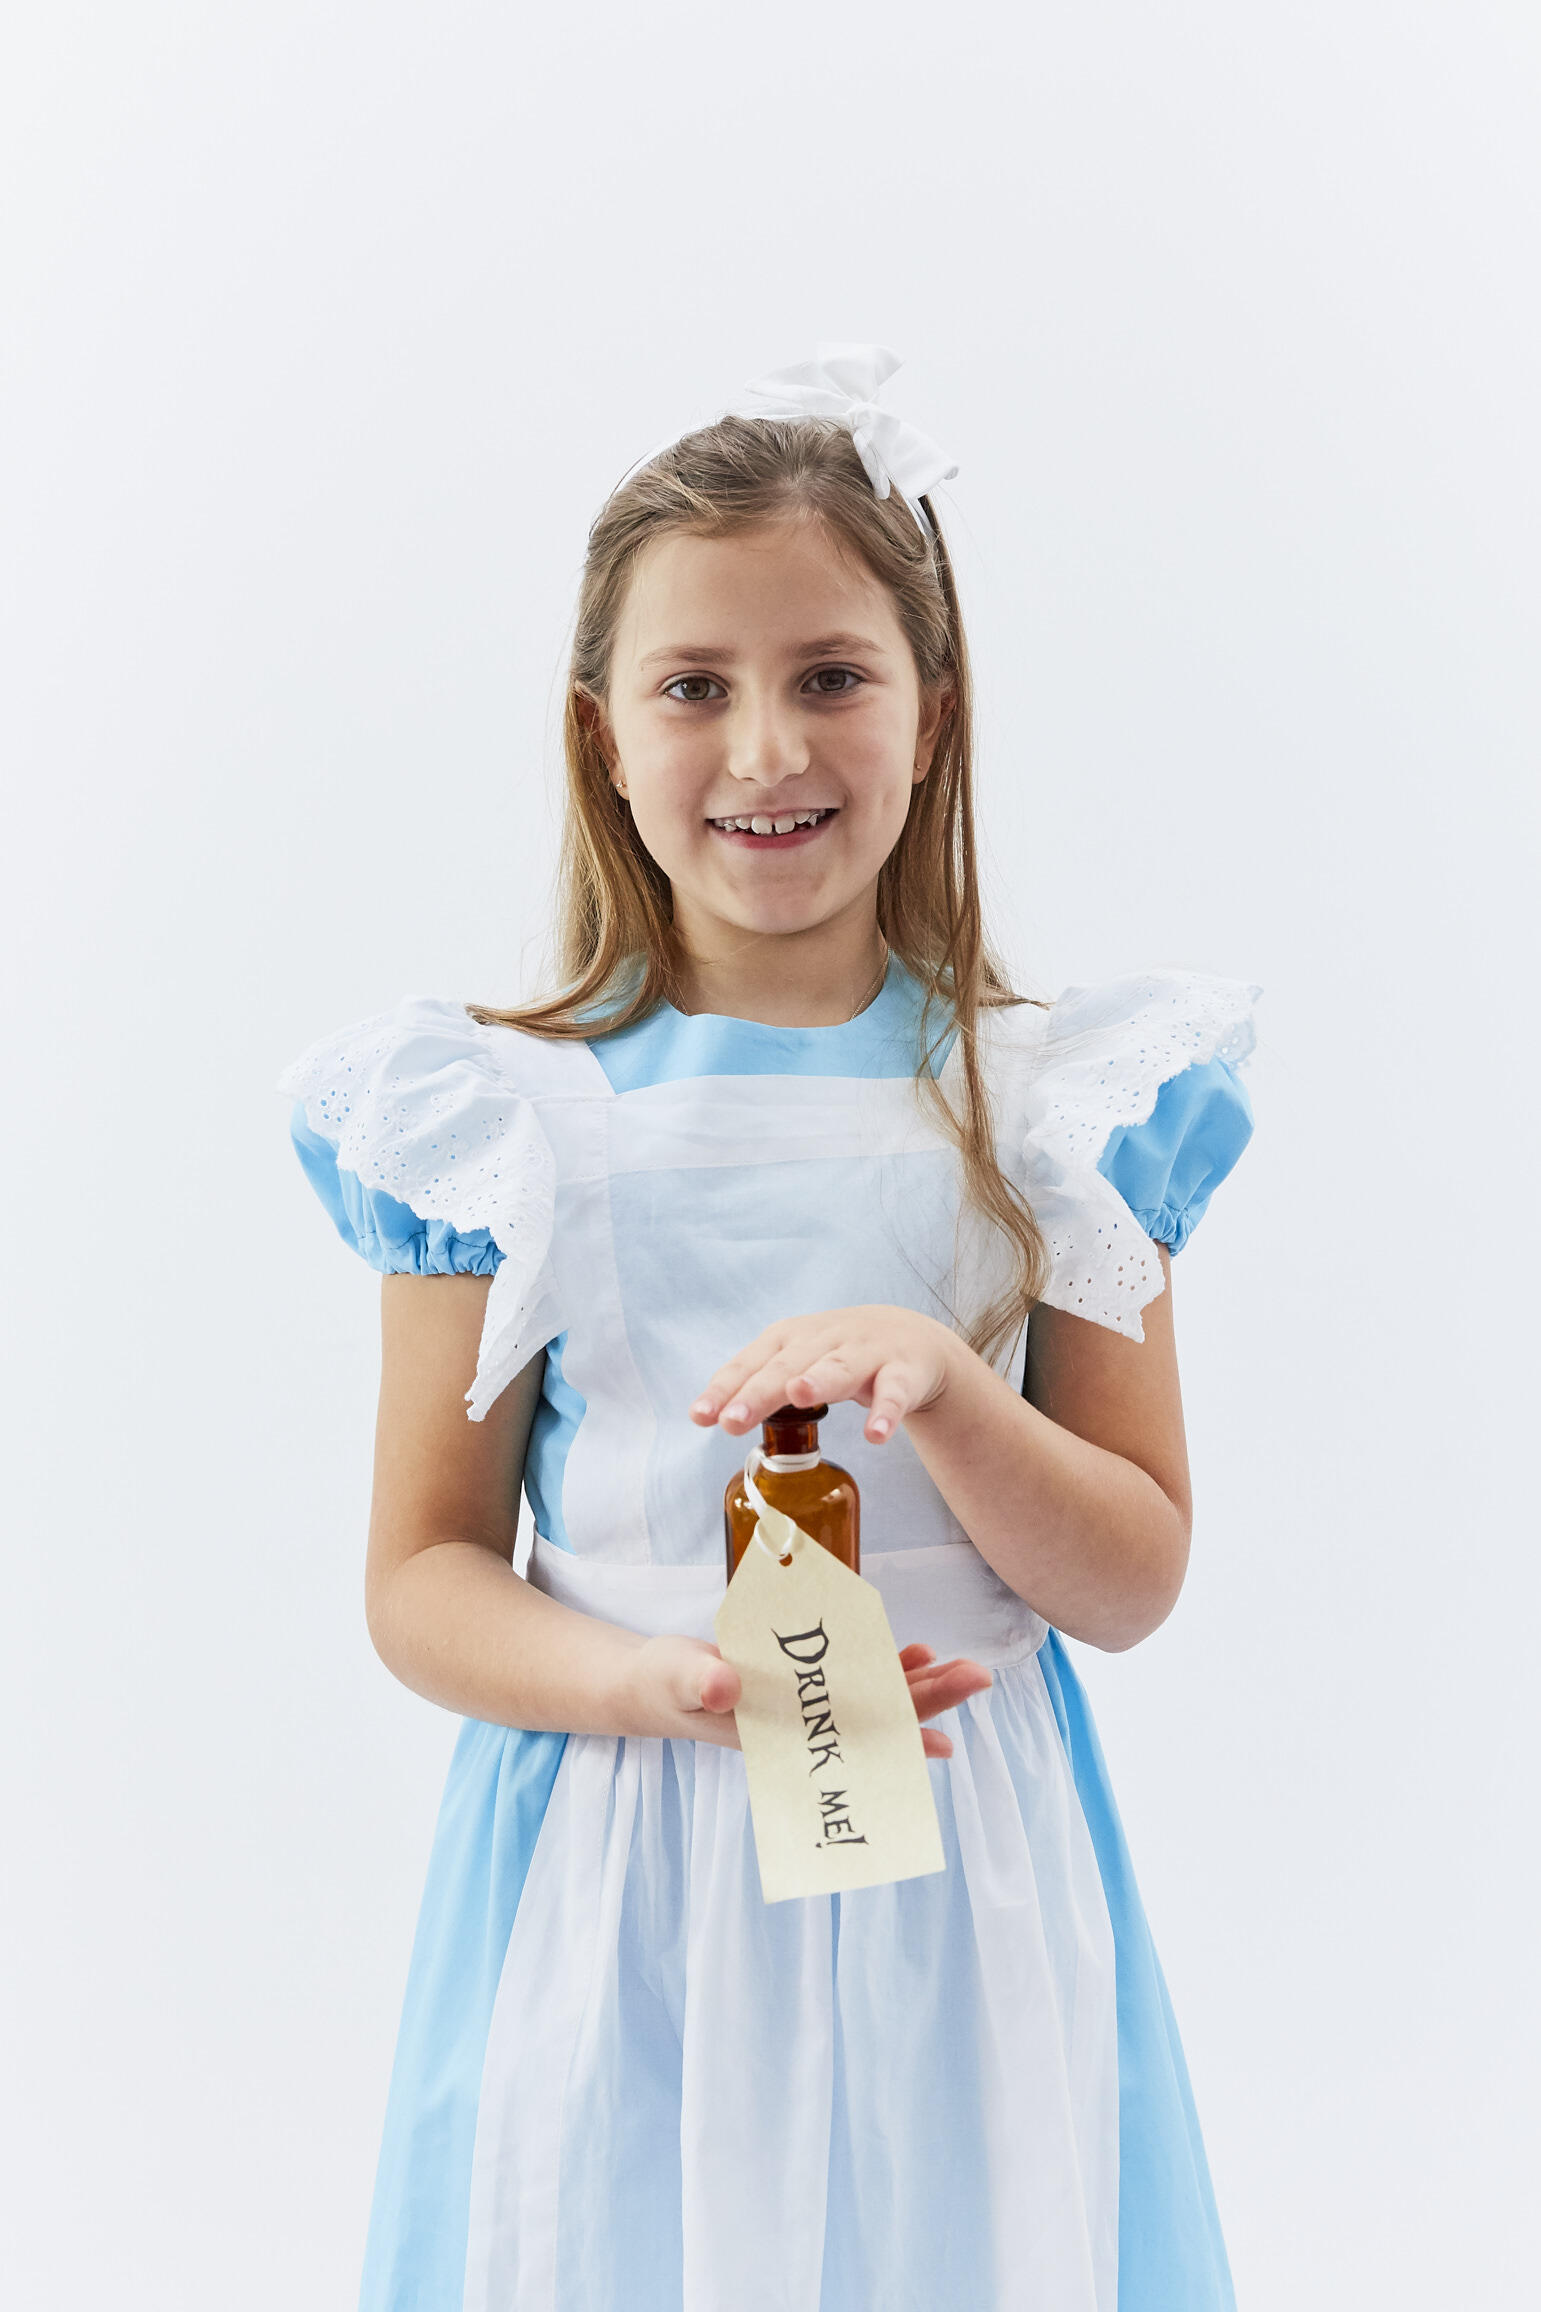 Alice in Wonderland dress for tea party and masquerade costume costumes